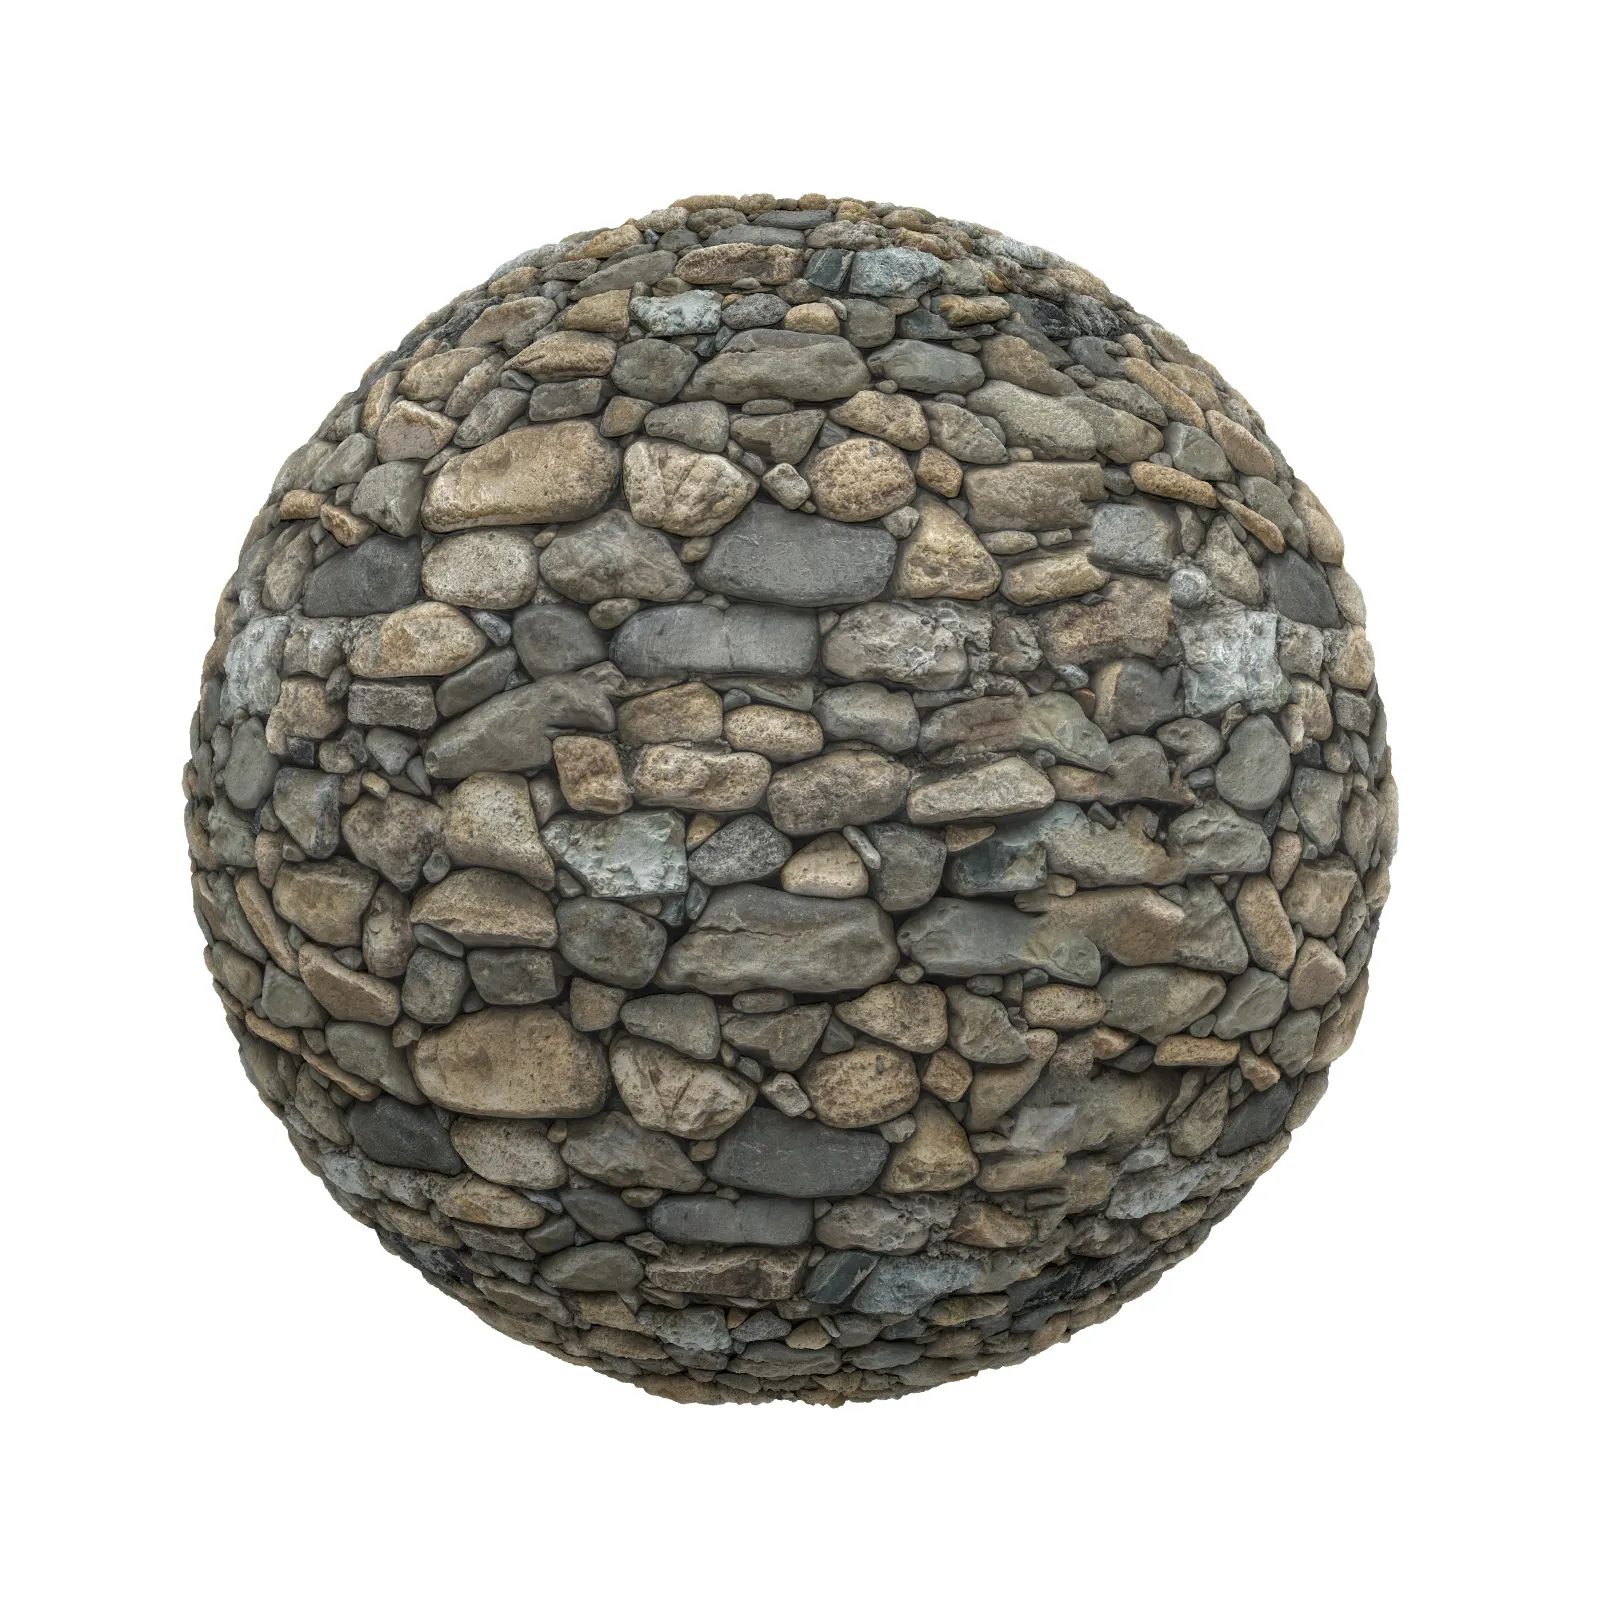 TEXTURES – STONES – CGAxis PBR Colection Vol 1 Stones – stone pavement